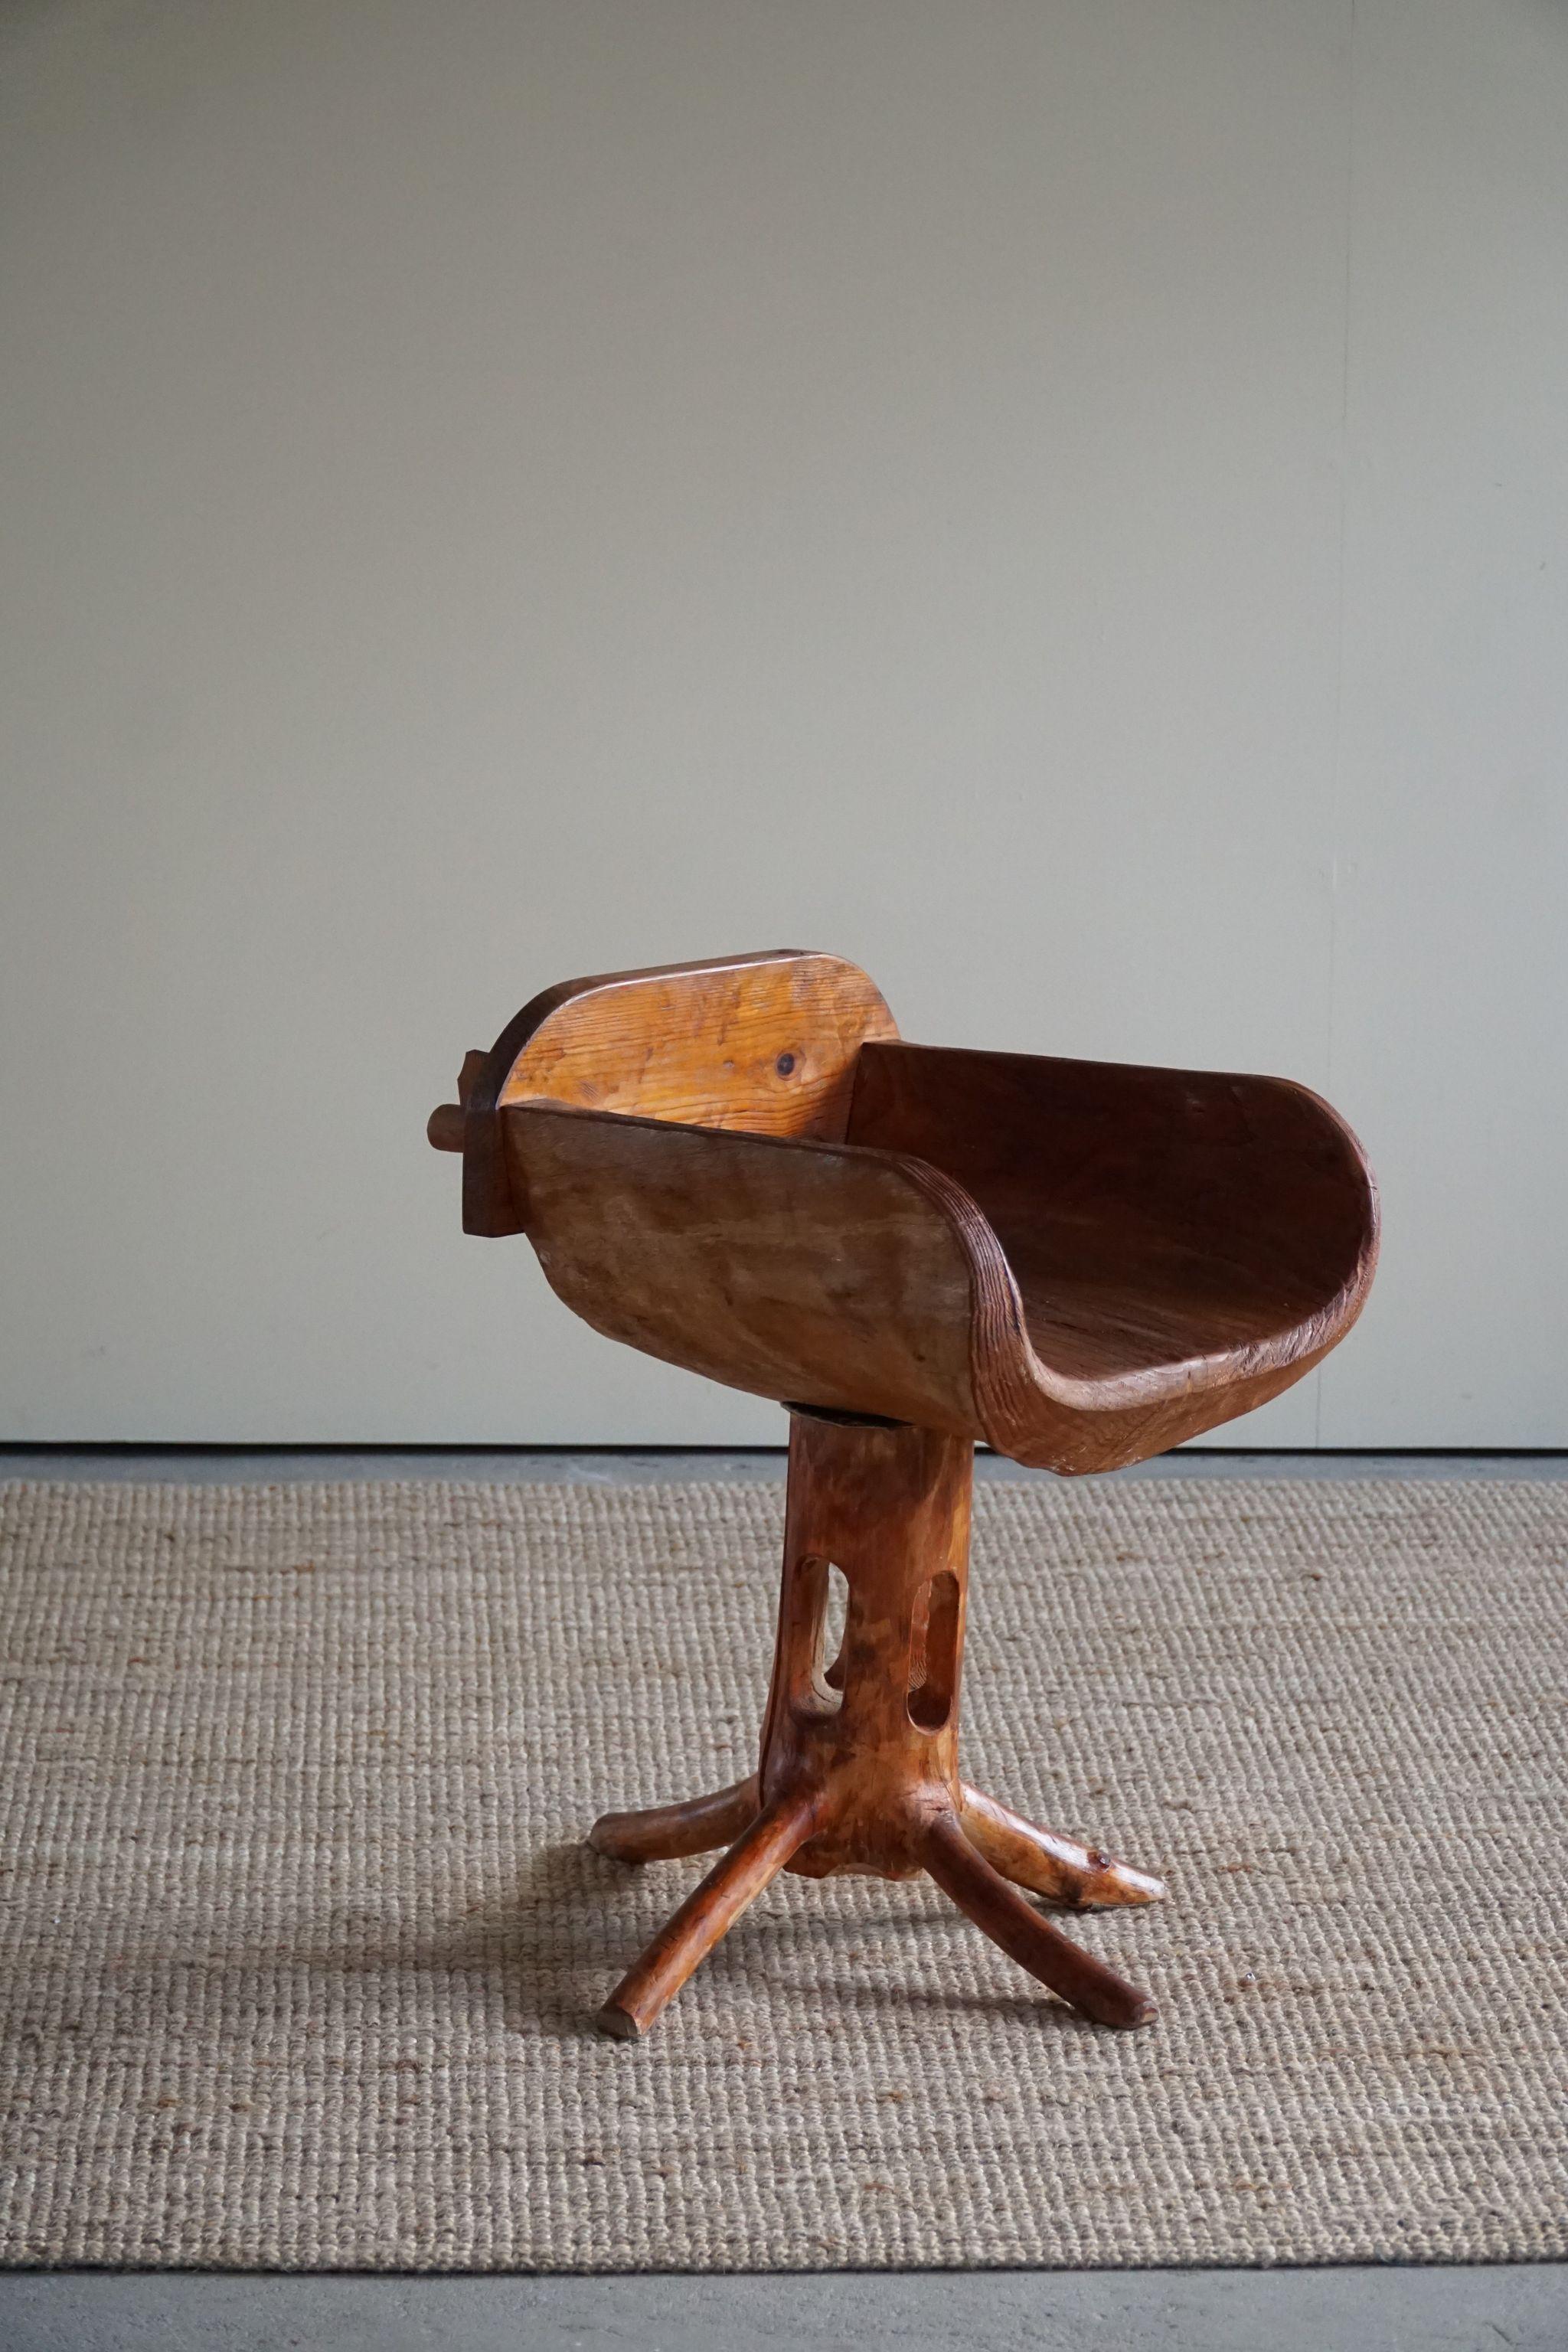 Hand-Carved Sculptural Unique Stump Chair by Finnish Matti Martikka in Solid Pine, 1960s For Sale